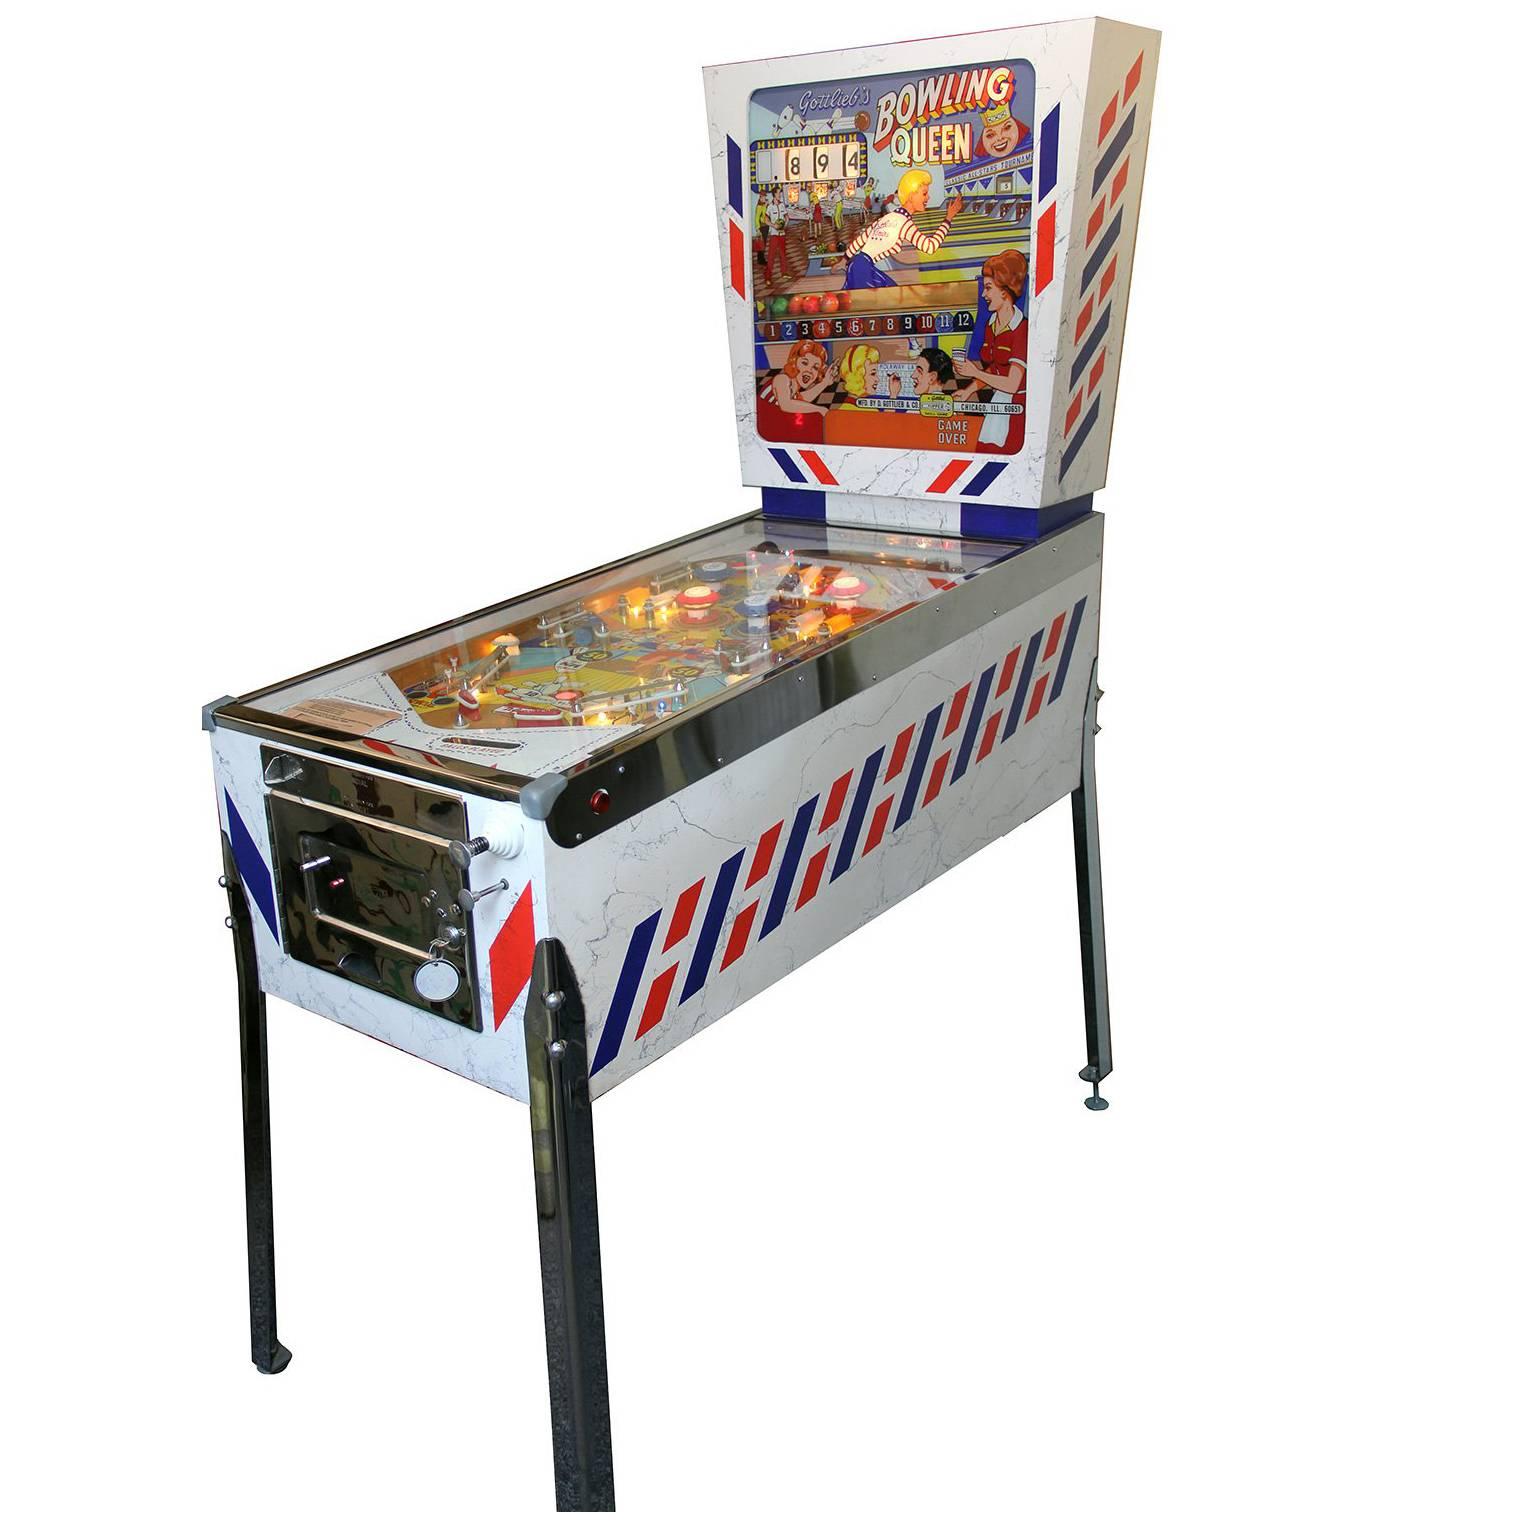 Gottlieb Bowling Queen, Vintage Pinball Machine 1964, Fully Restored For Sale